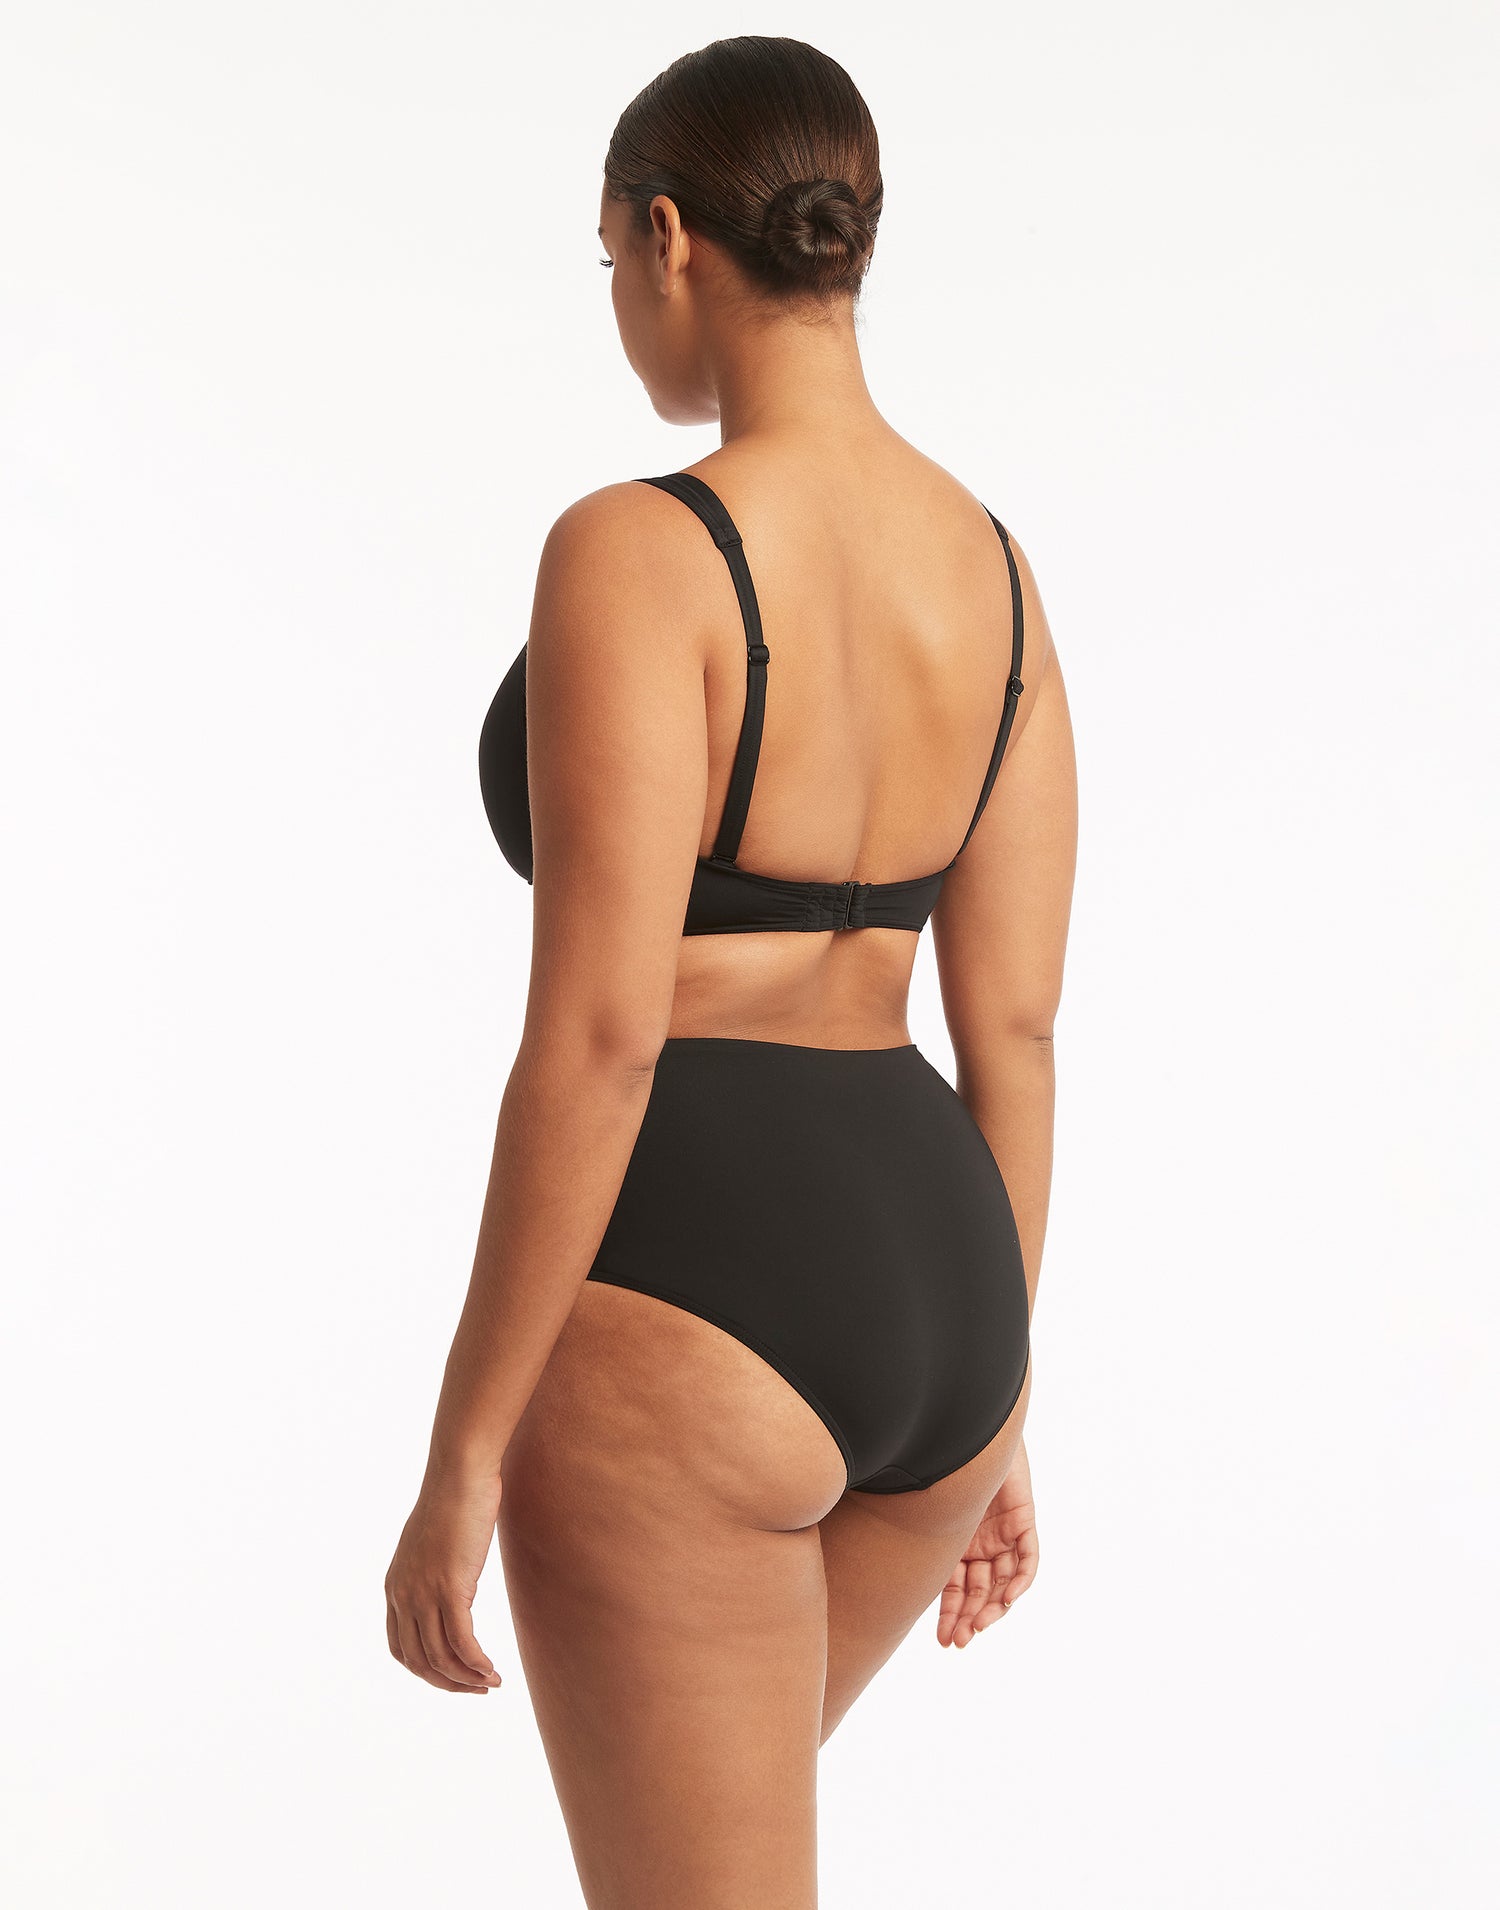 Essentials Gathered Side High Waist Bottom by Sea Level in Black - Back View